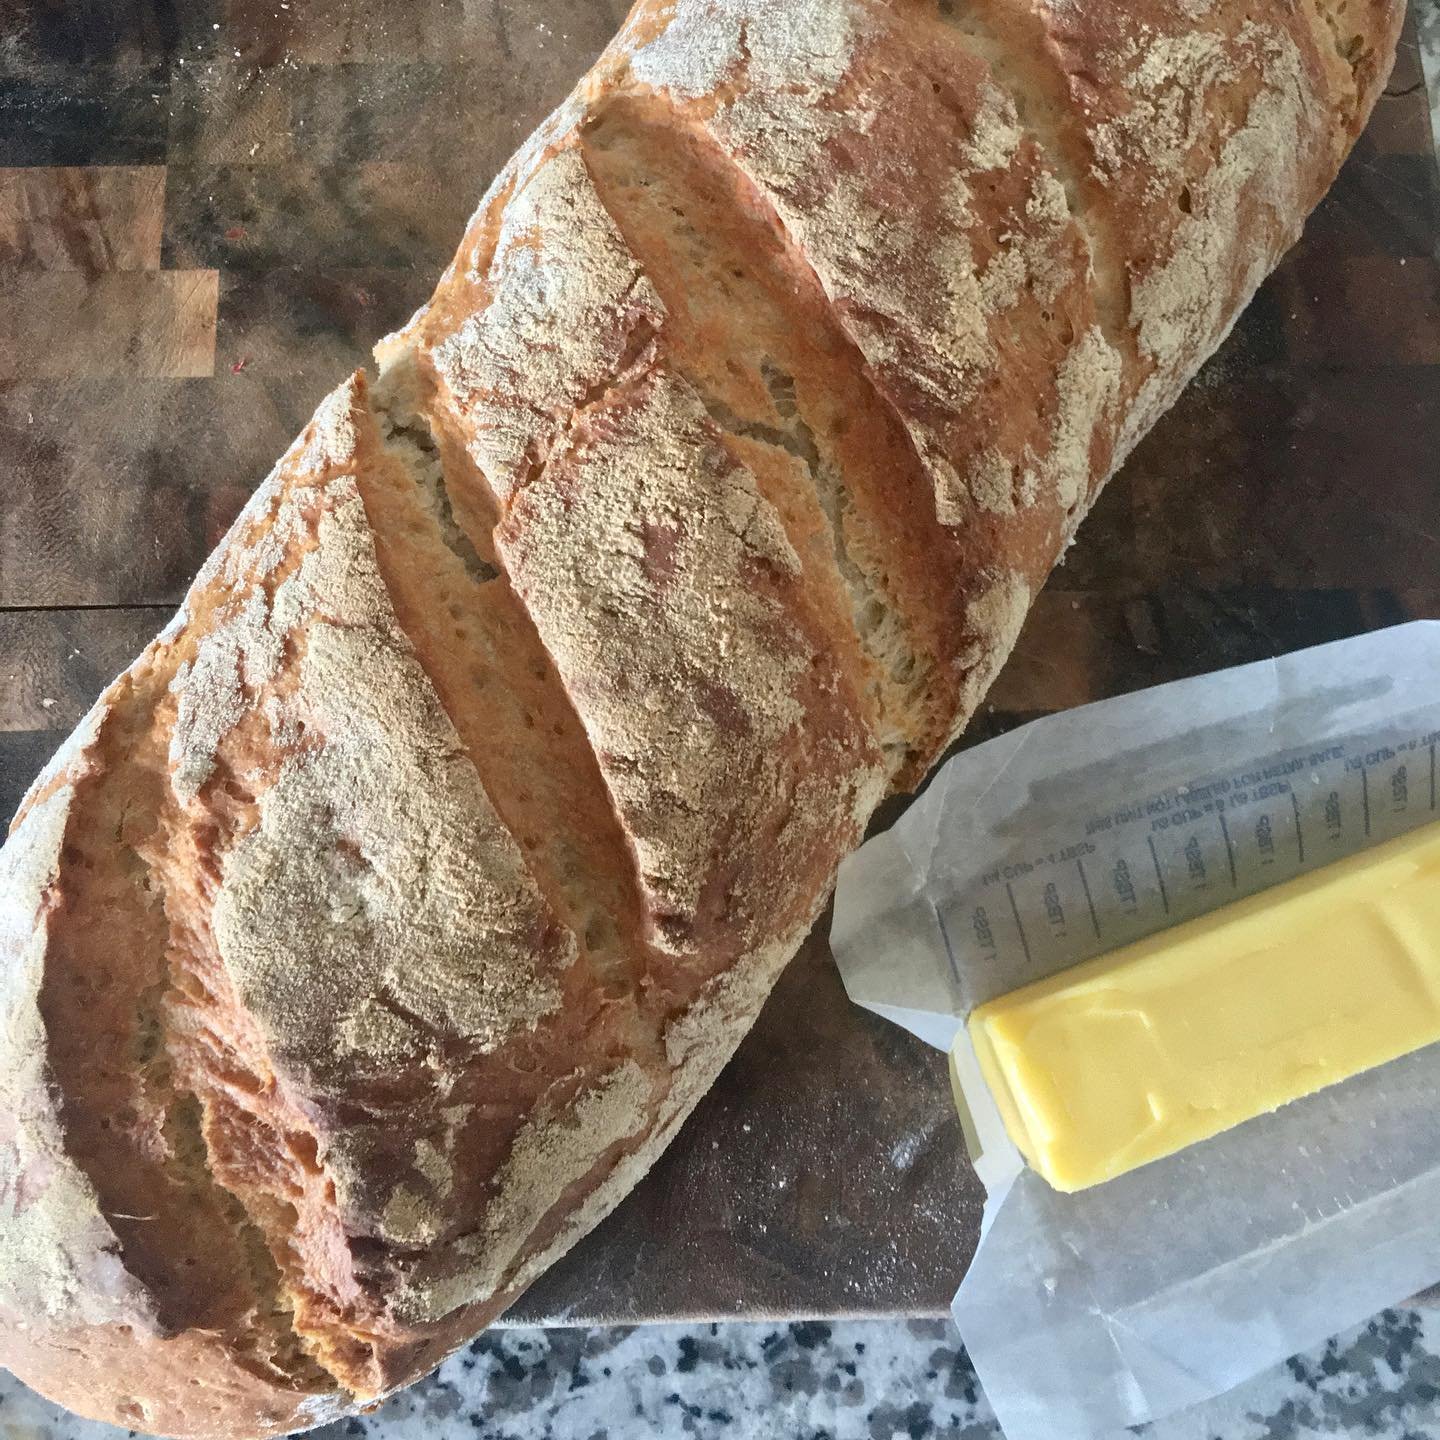 Been a while since I posted a beautiful loaf of bread.